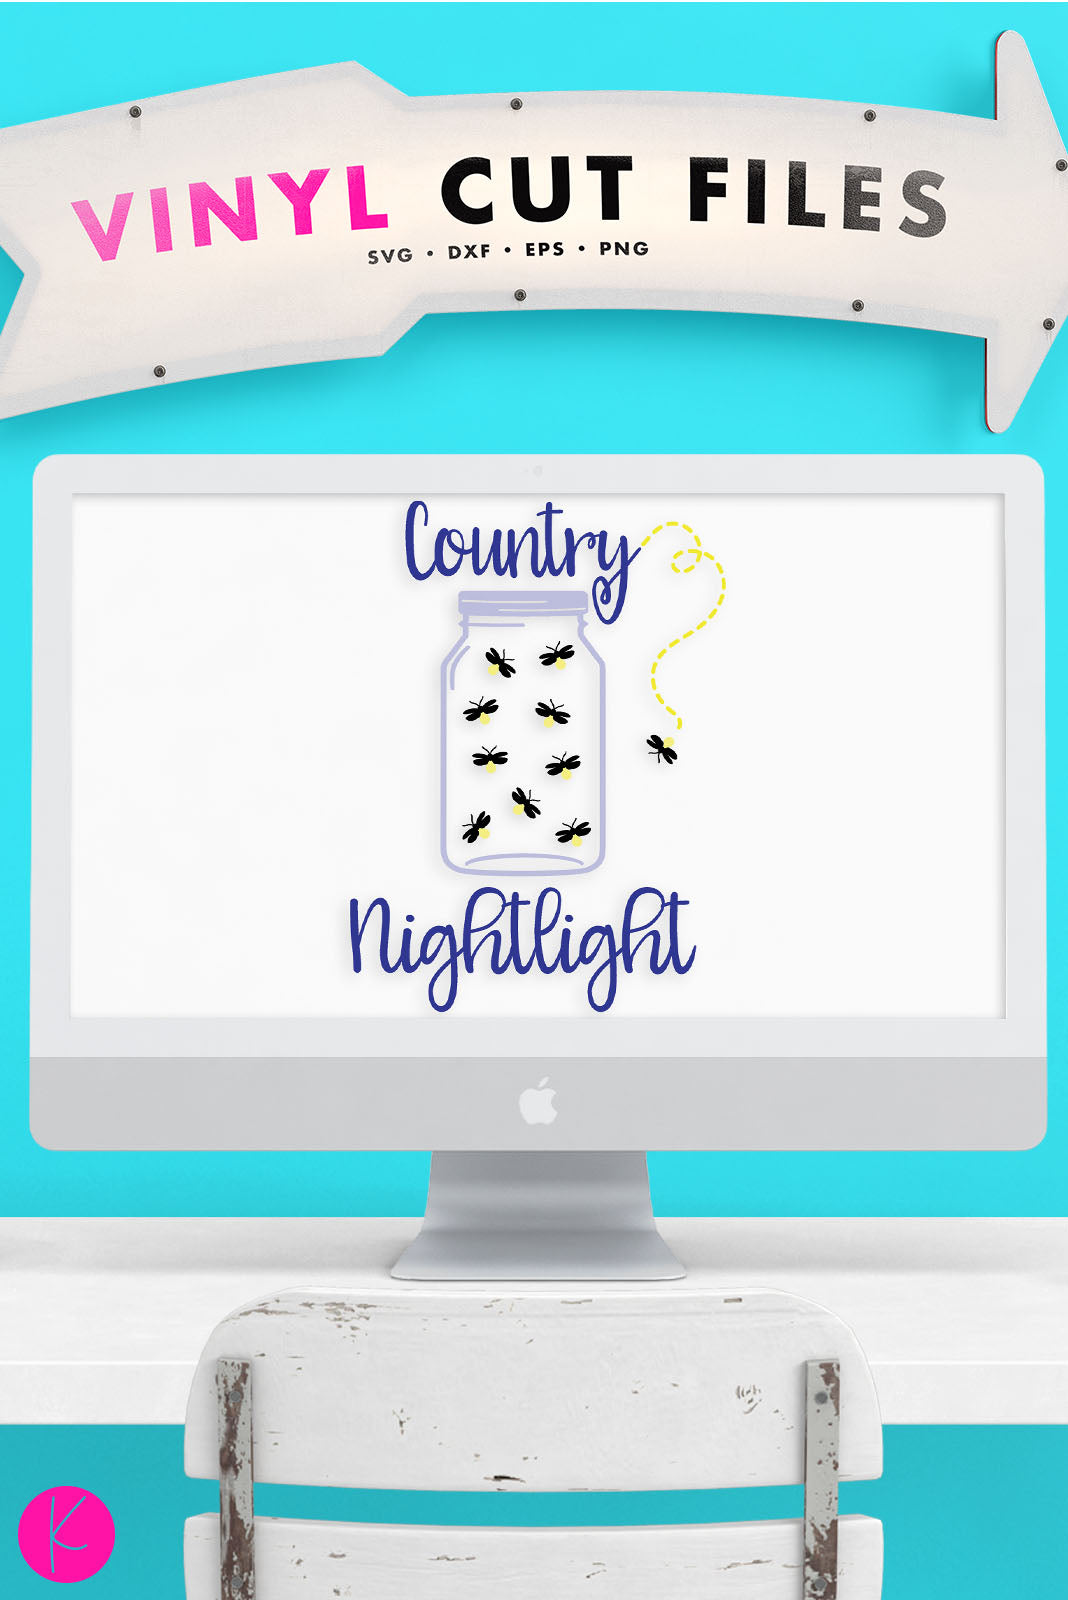 Country Nightlight | SVG DXF EPS PNG Cut Files